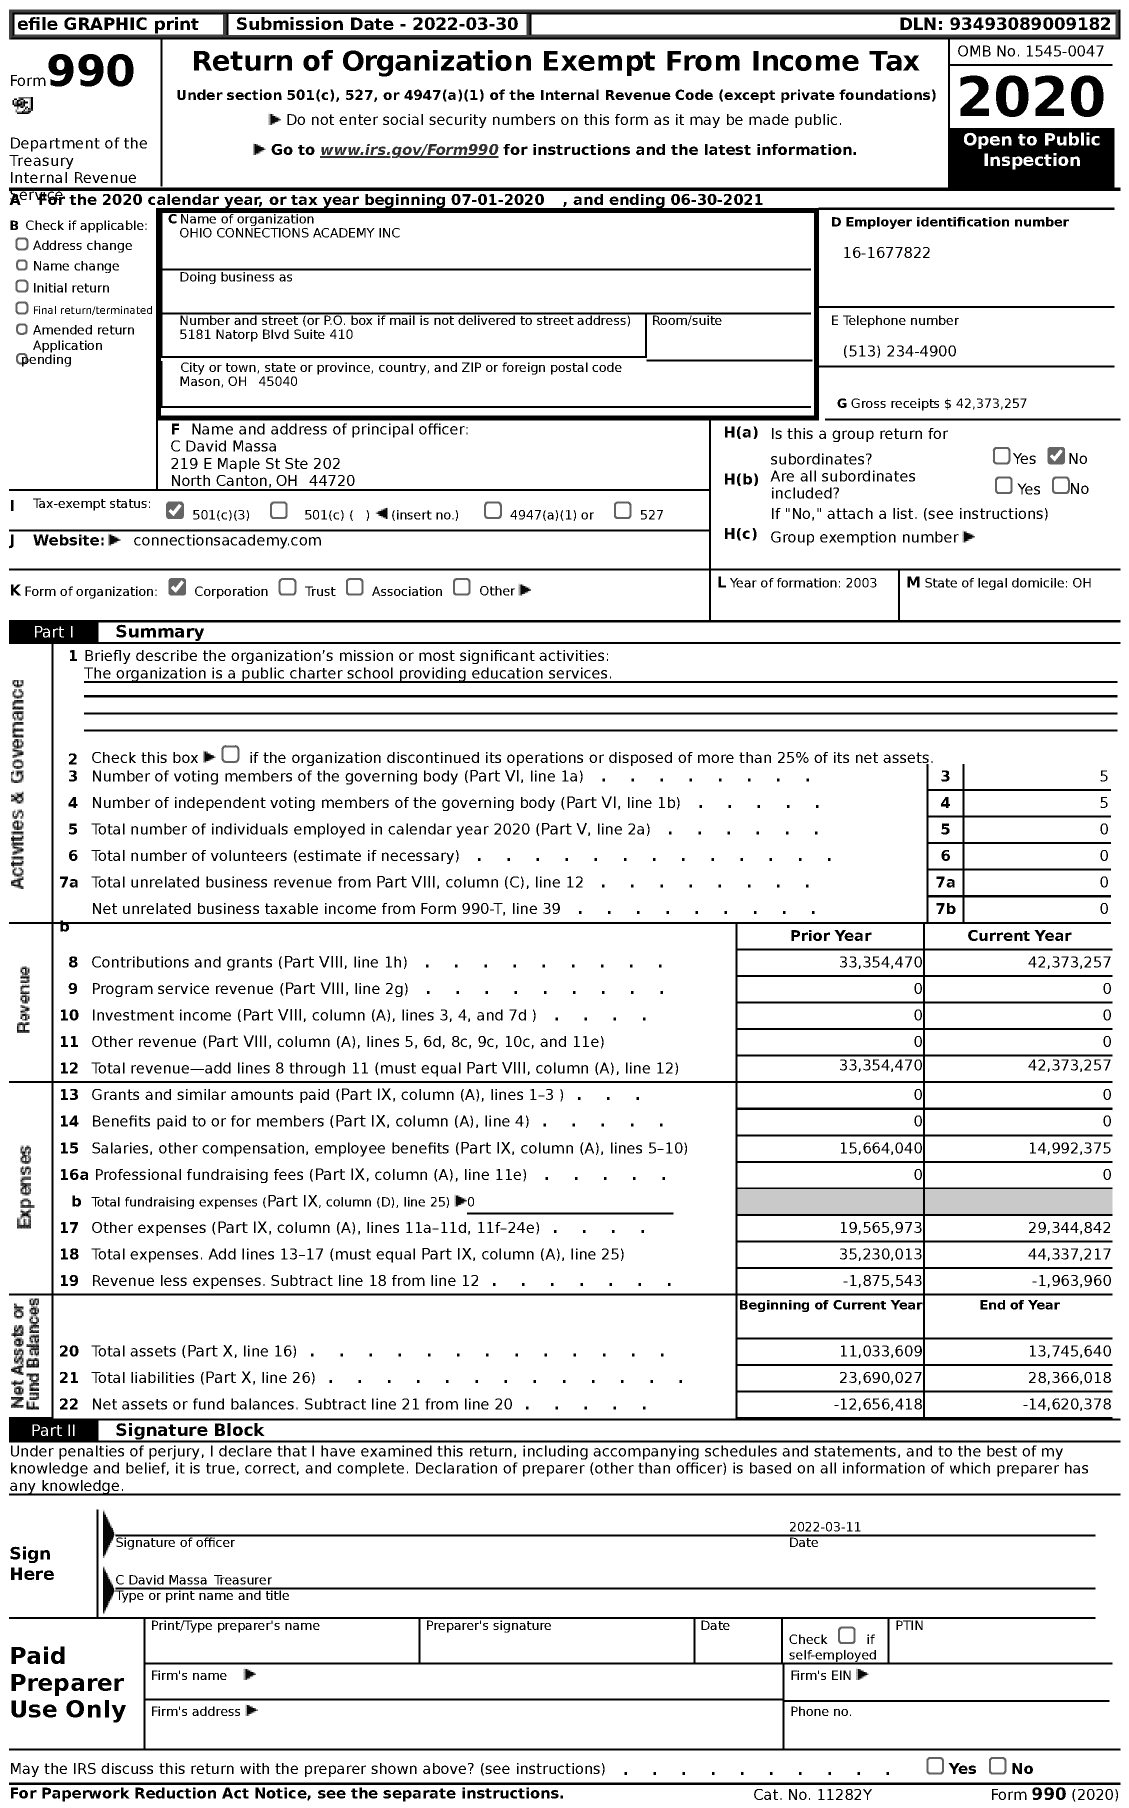 Image of first page of 2020 Form 990 for Ohio Connections Academy (OCA)